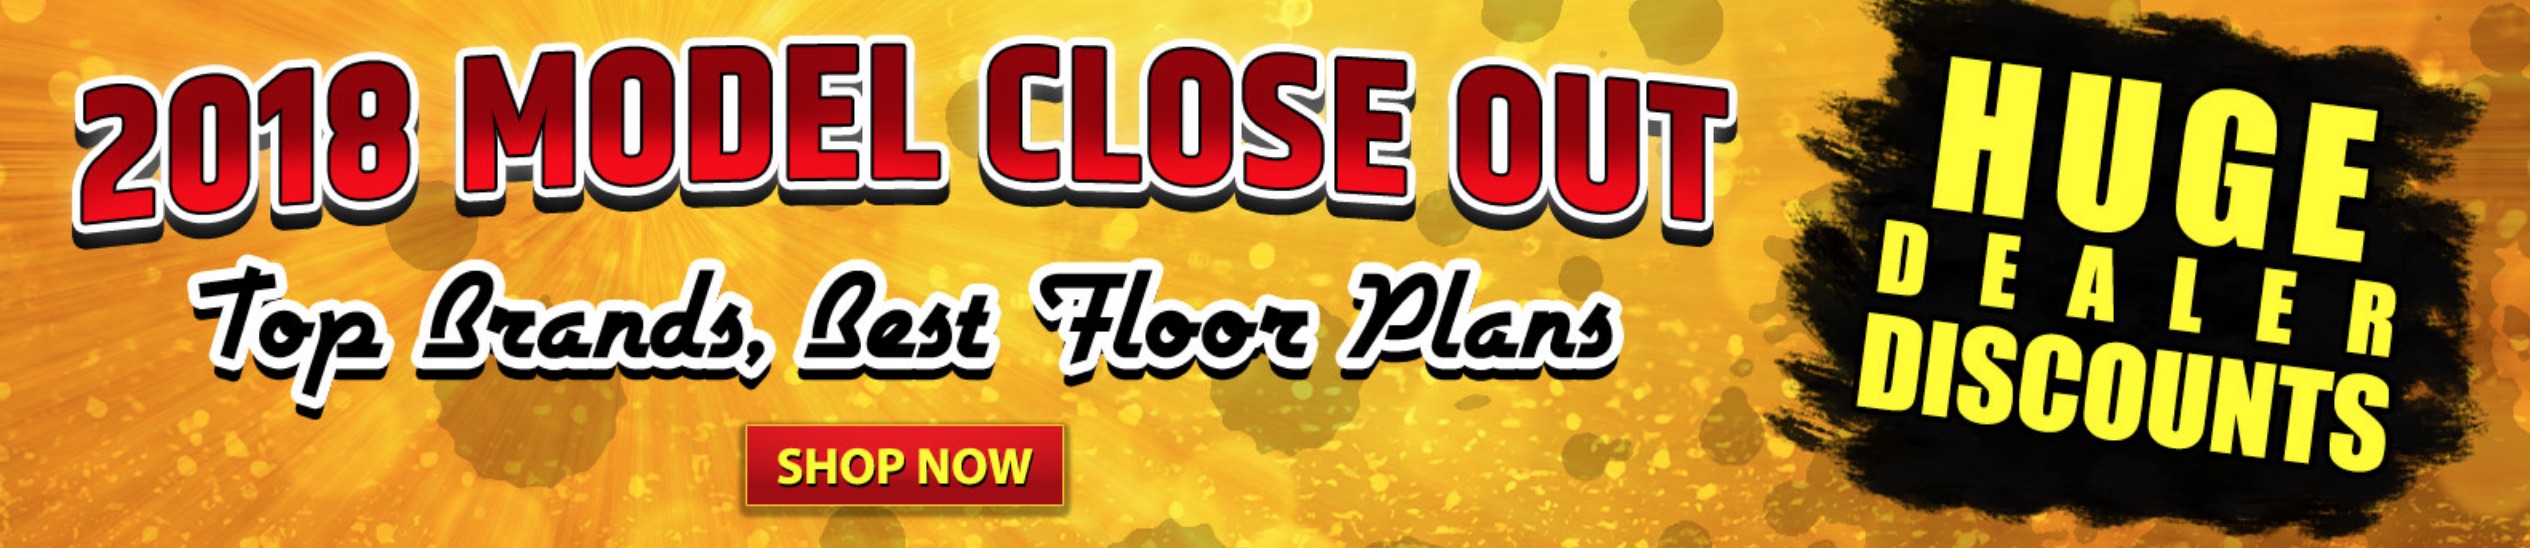 2018 Model Closeout Banner